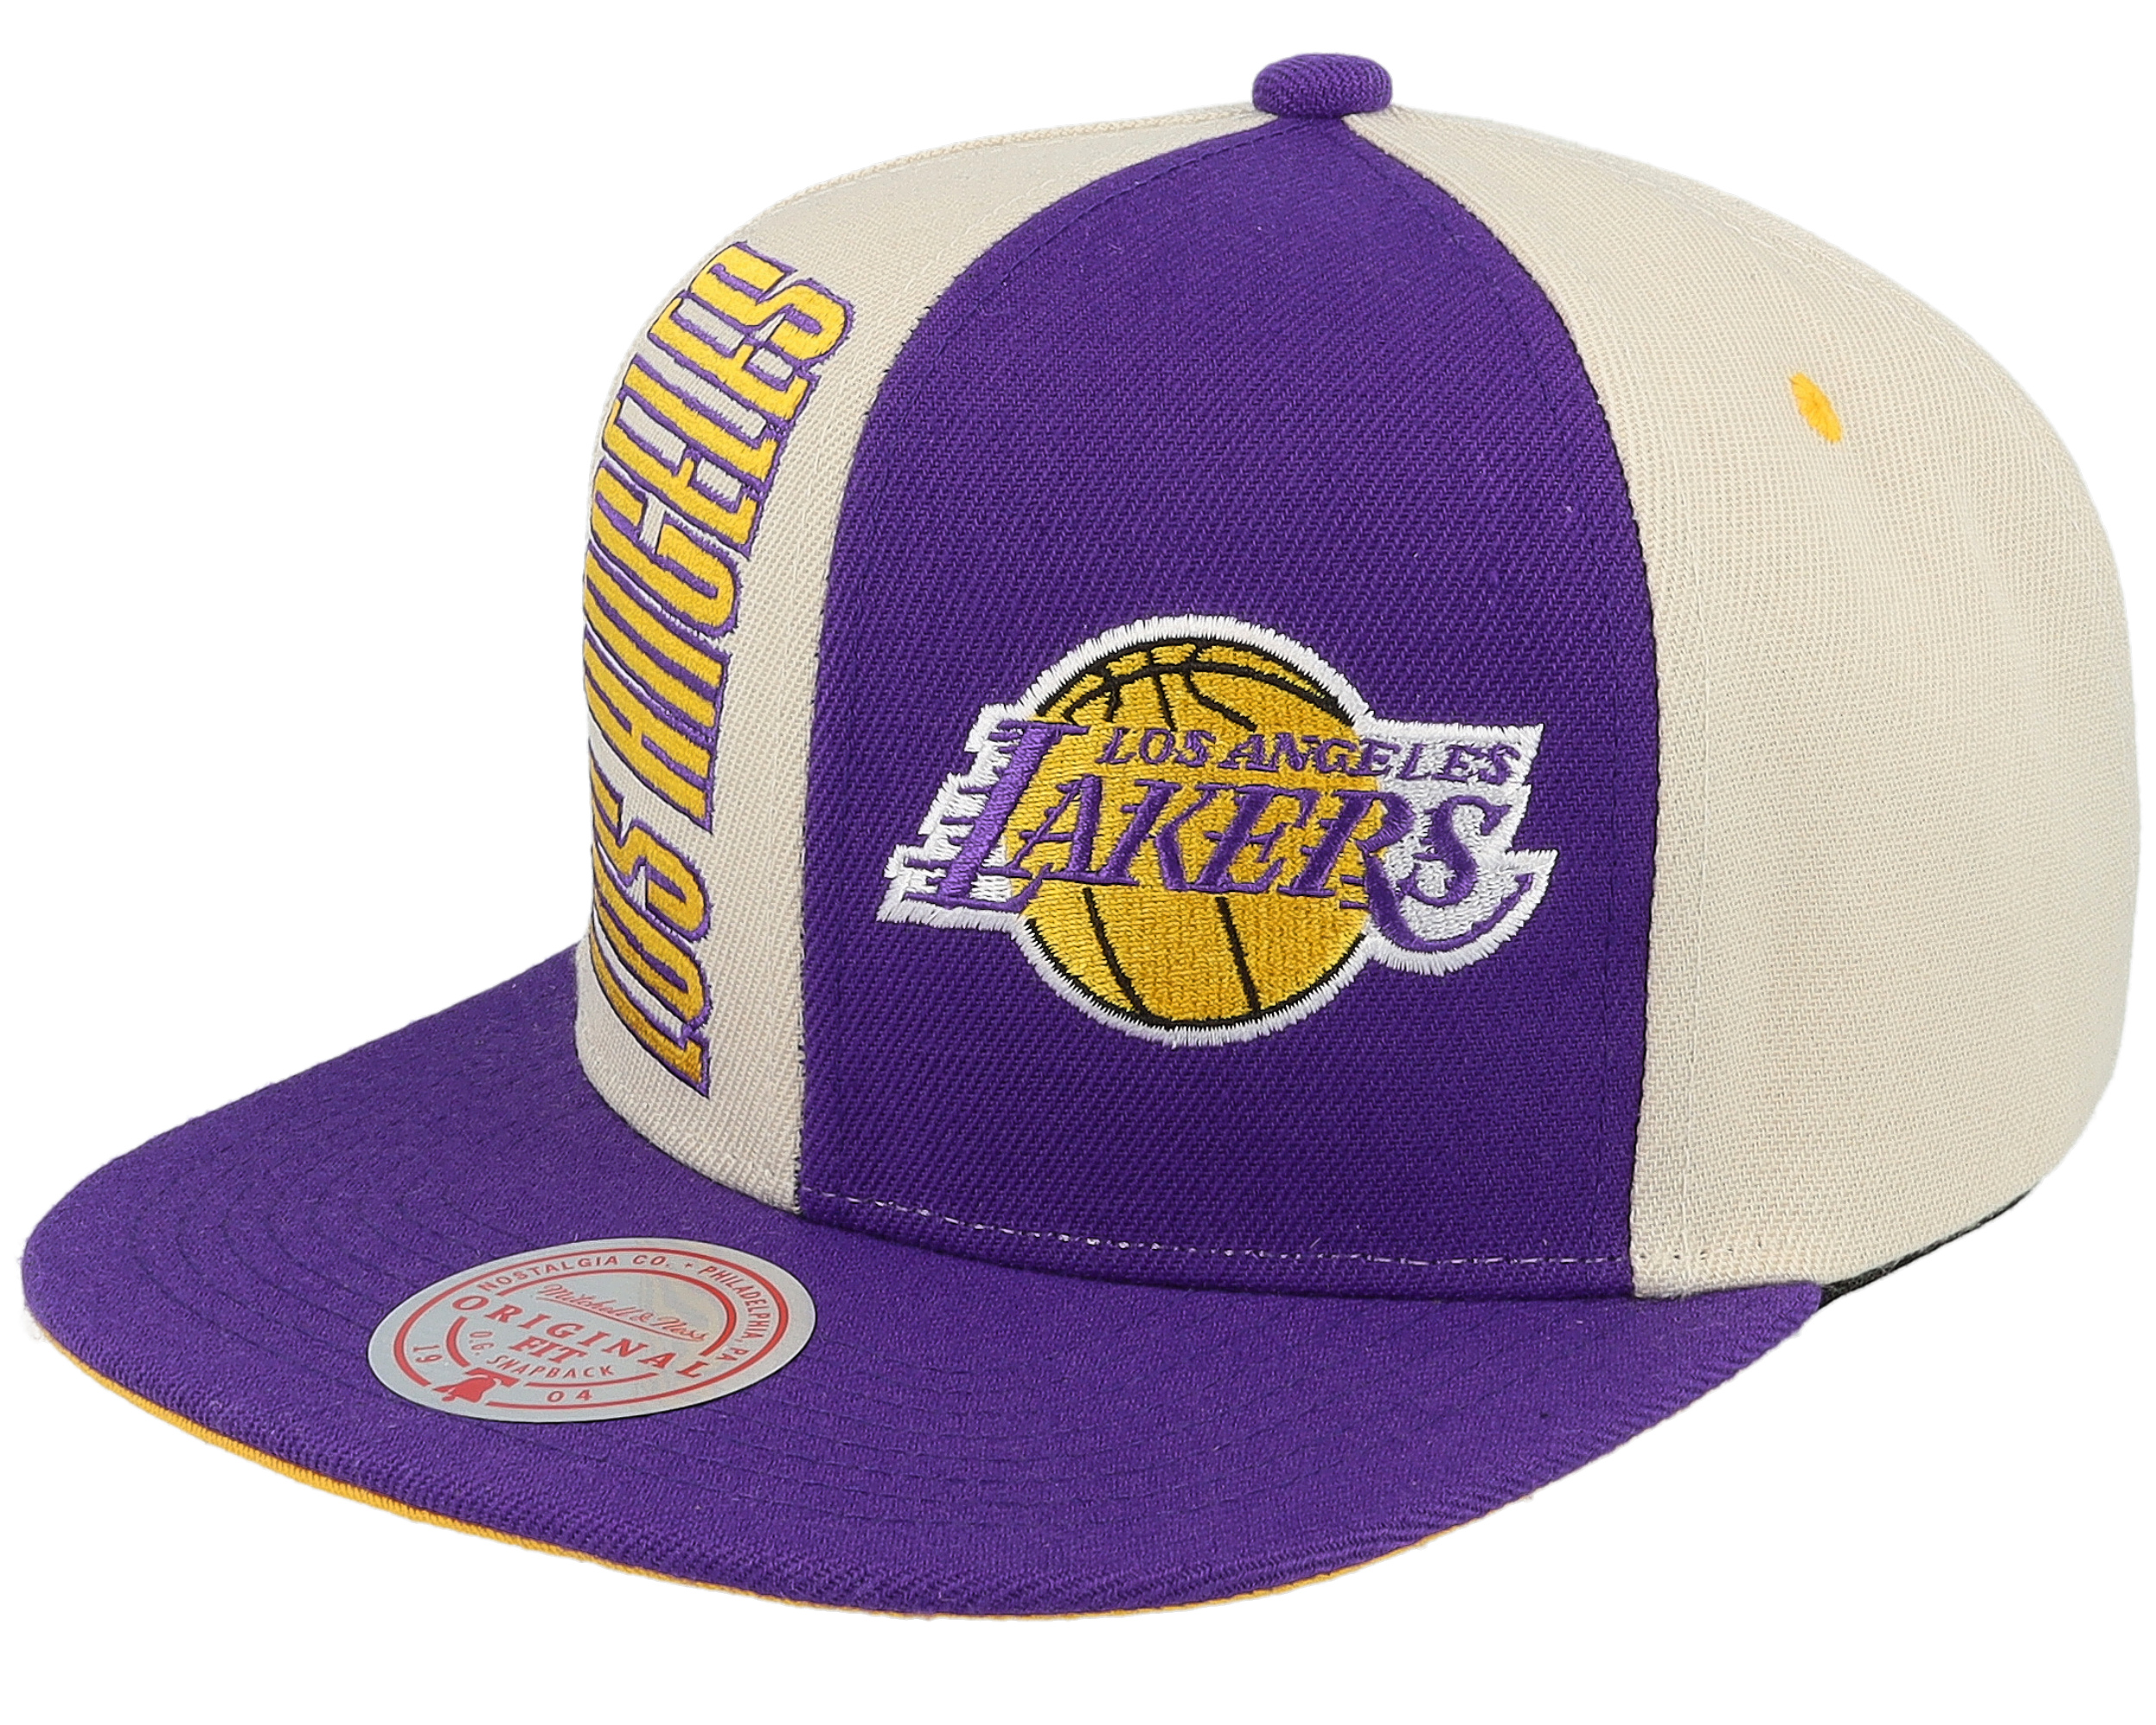 Mitchell & Ness Los Angeles Lakers White Gold Pop Snapback Hat